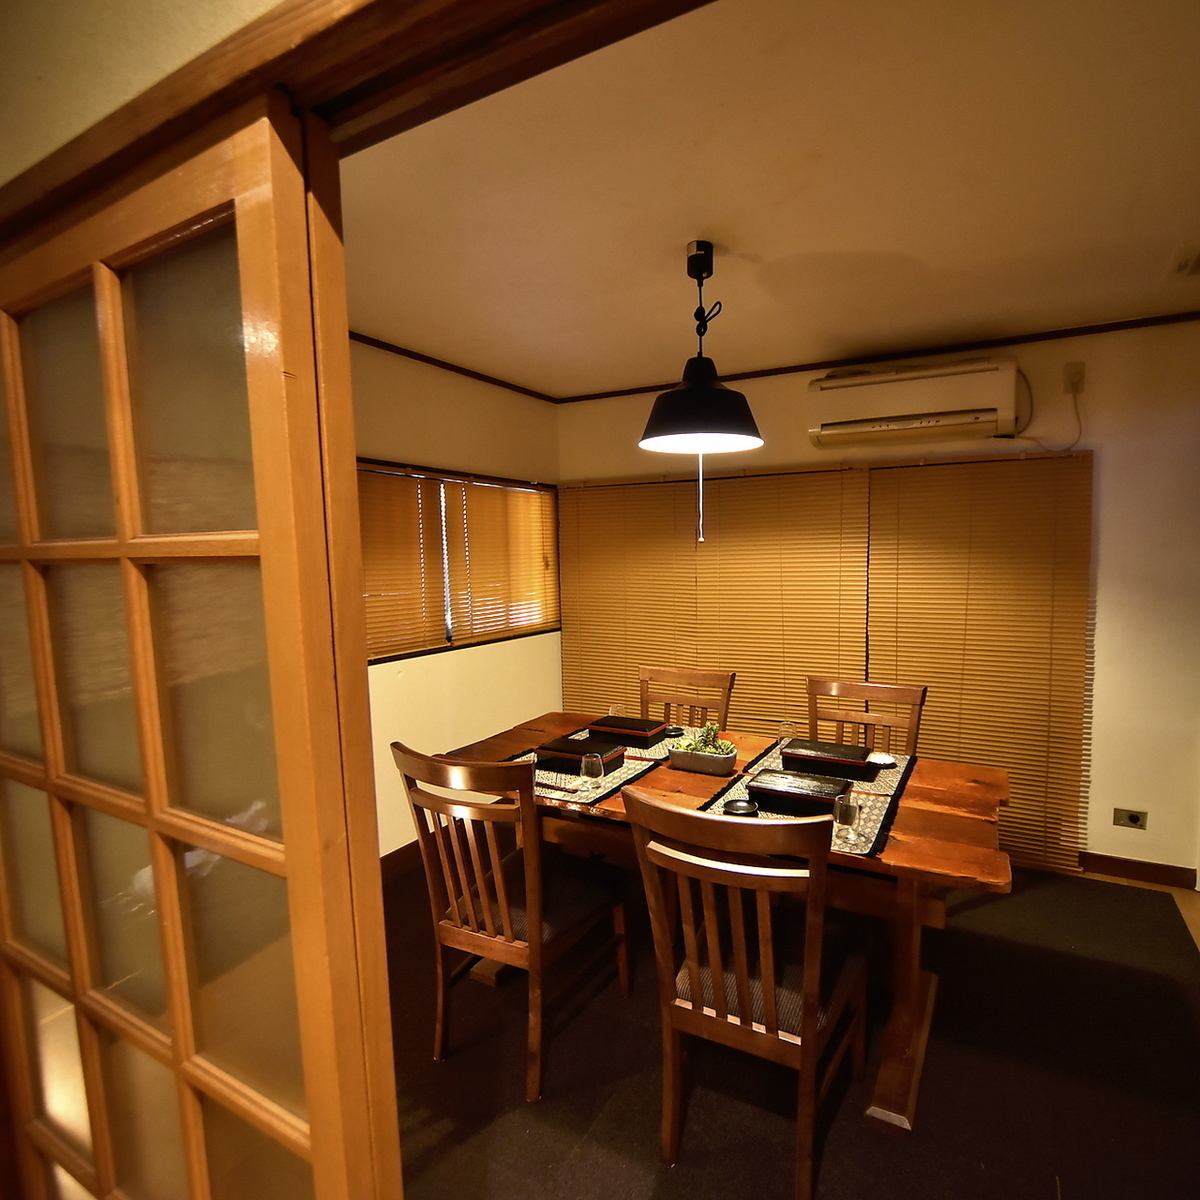 We have private rooms full of the atmosphere of an old folk house!